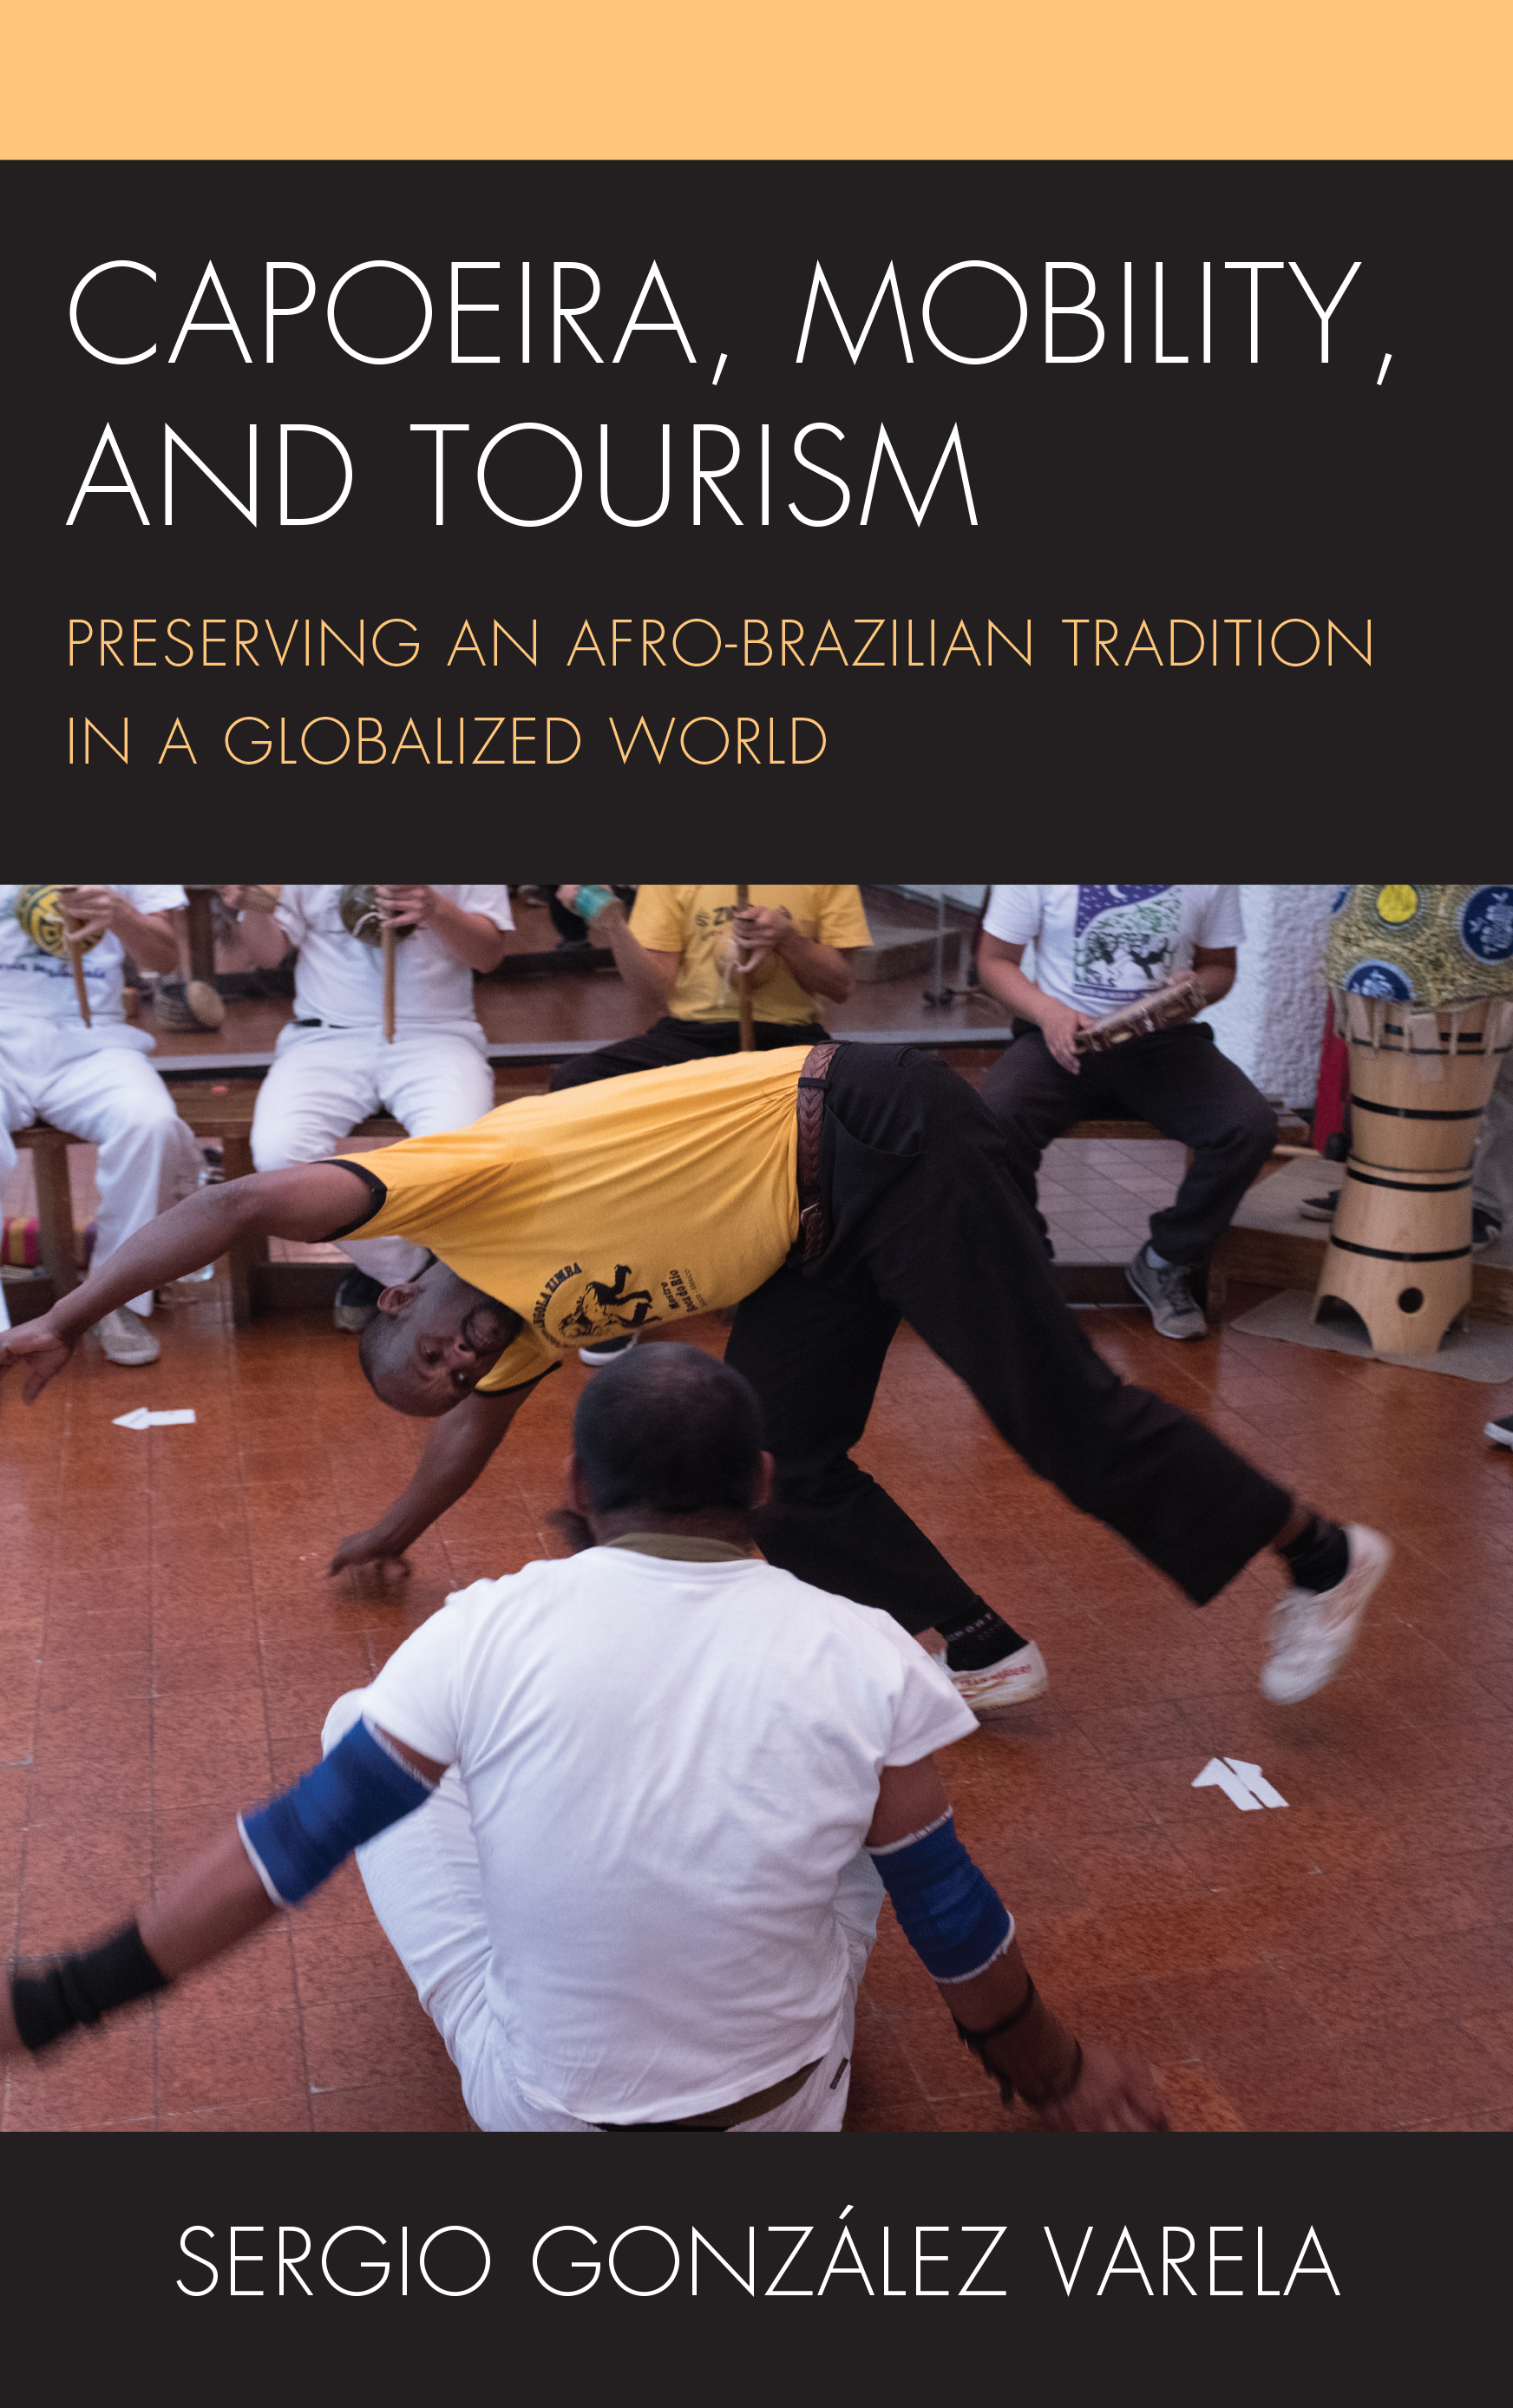 Capoeira, Mobility, and Tourism: Preserving an Afro-Brazilian Tradition in a Globalized World